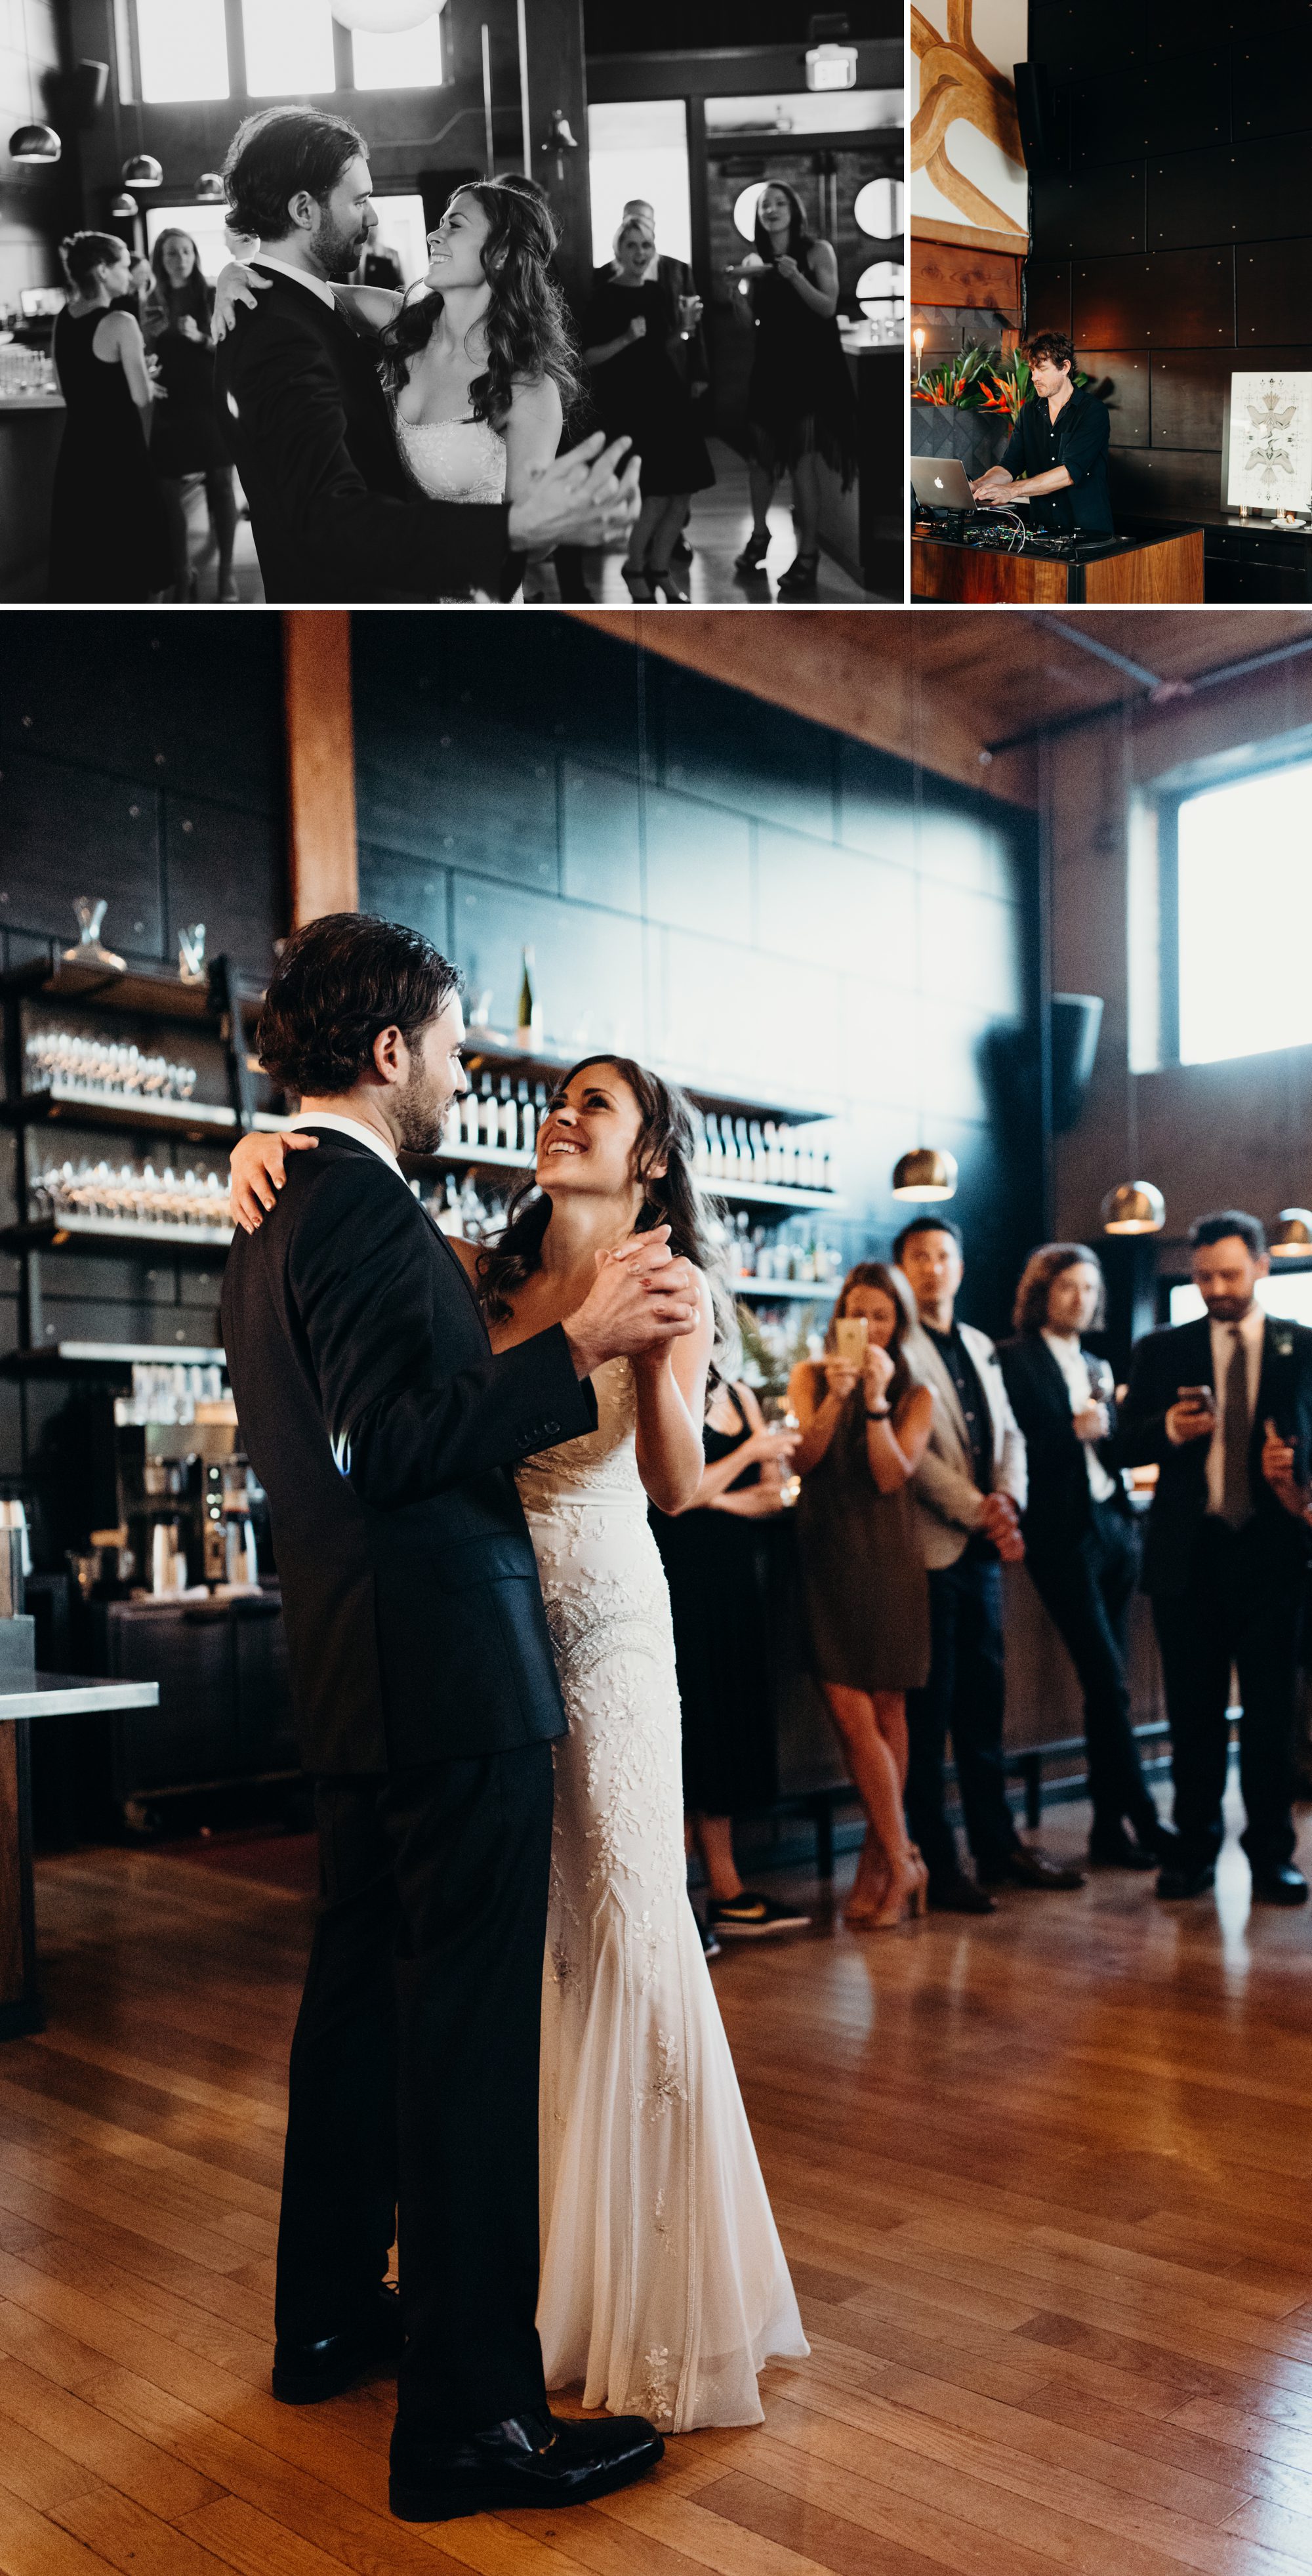 The bride and groom take their first dance. By Plaza del Toro wedding photographer Briana Morrison.